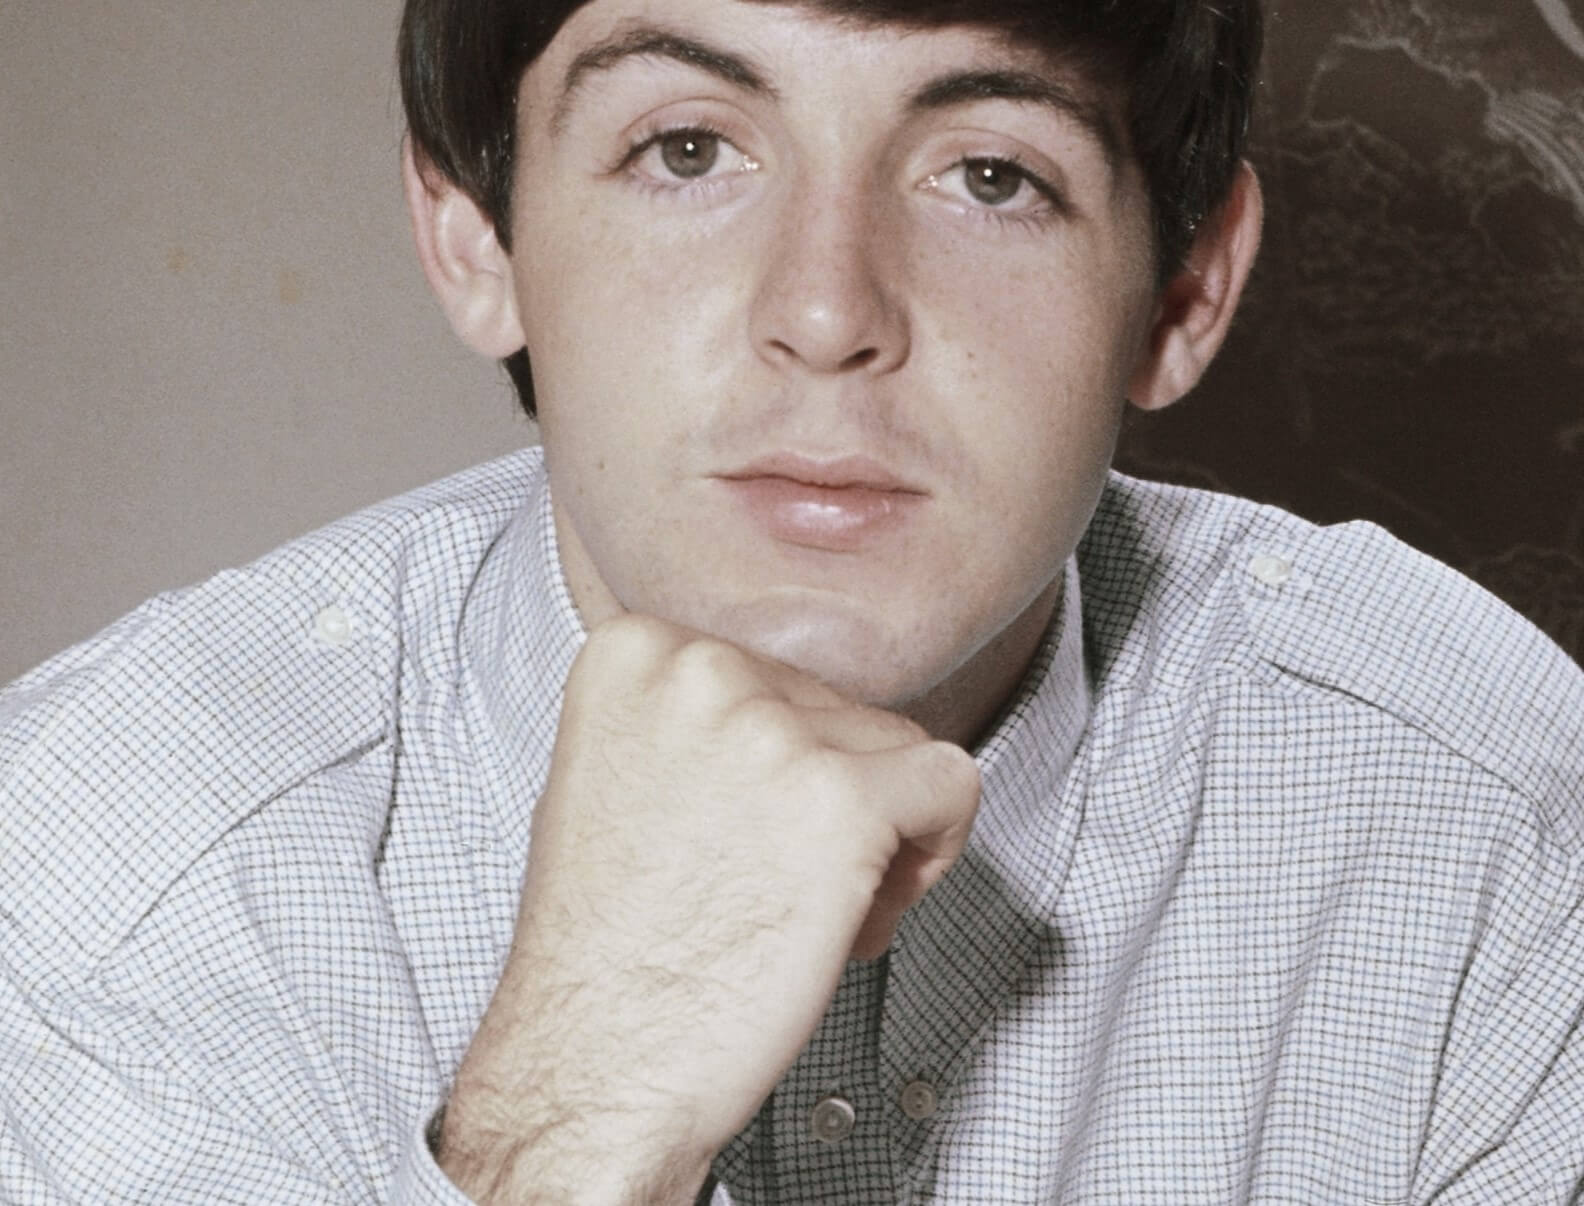 The Beatles' Paul McCartney with his head on his hand